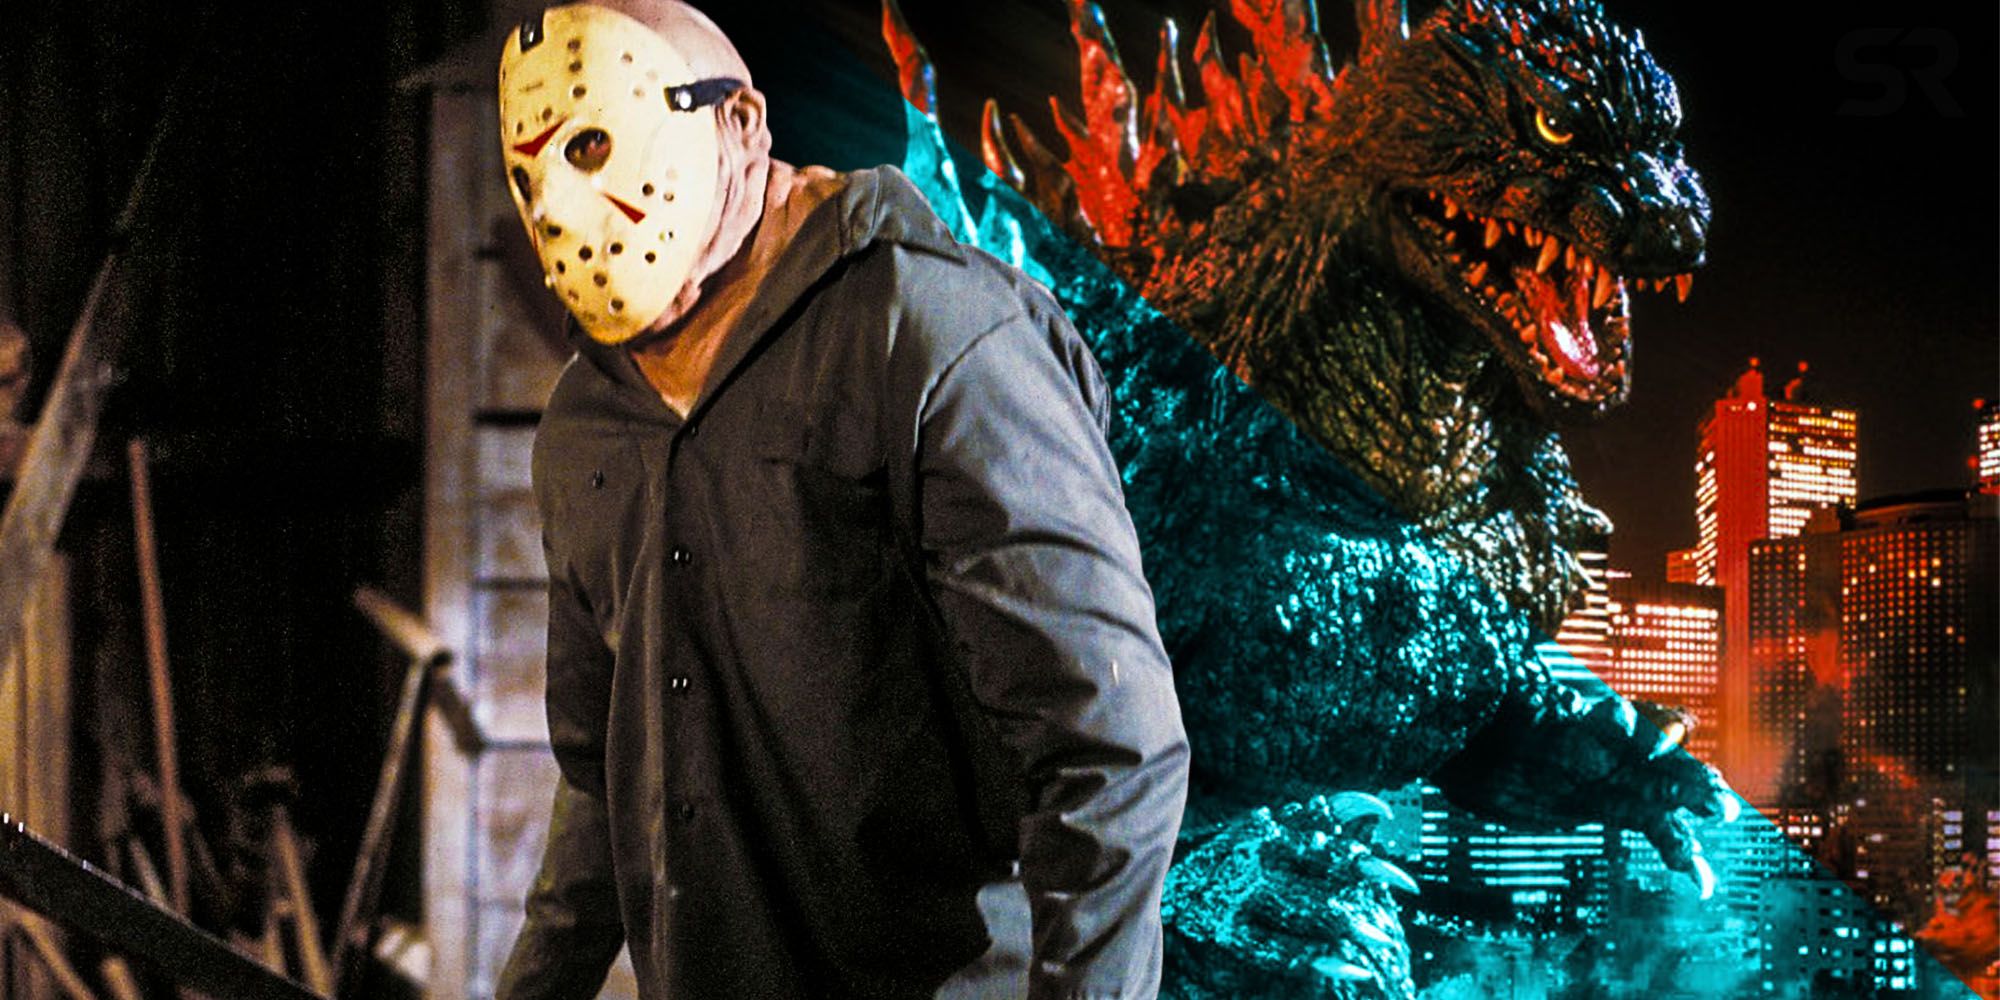 friday the 13th part 3 godzilla easter egg reference